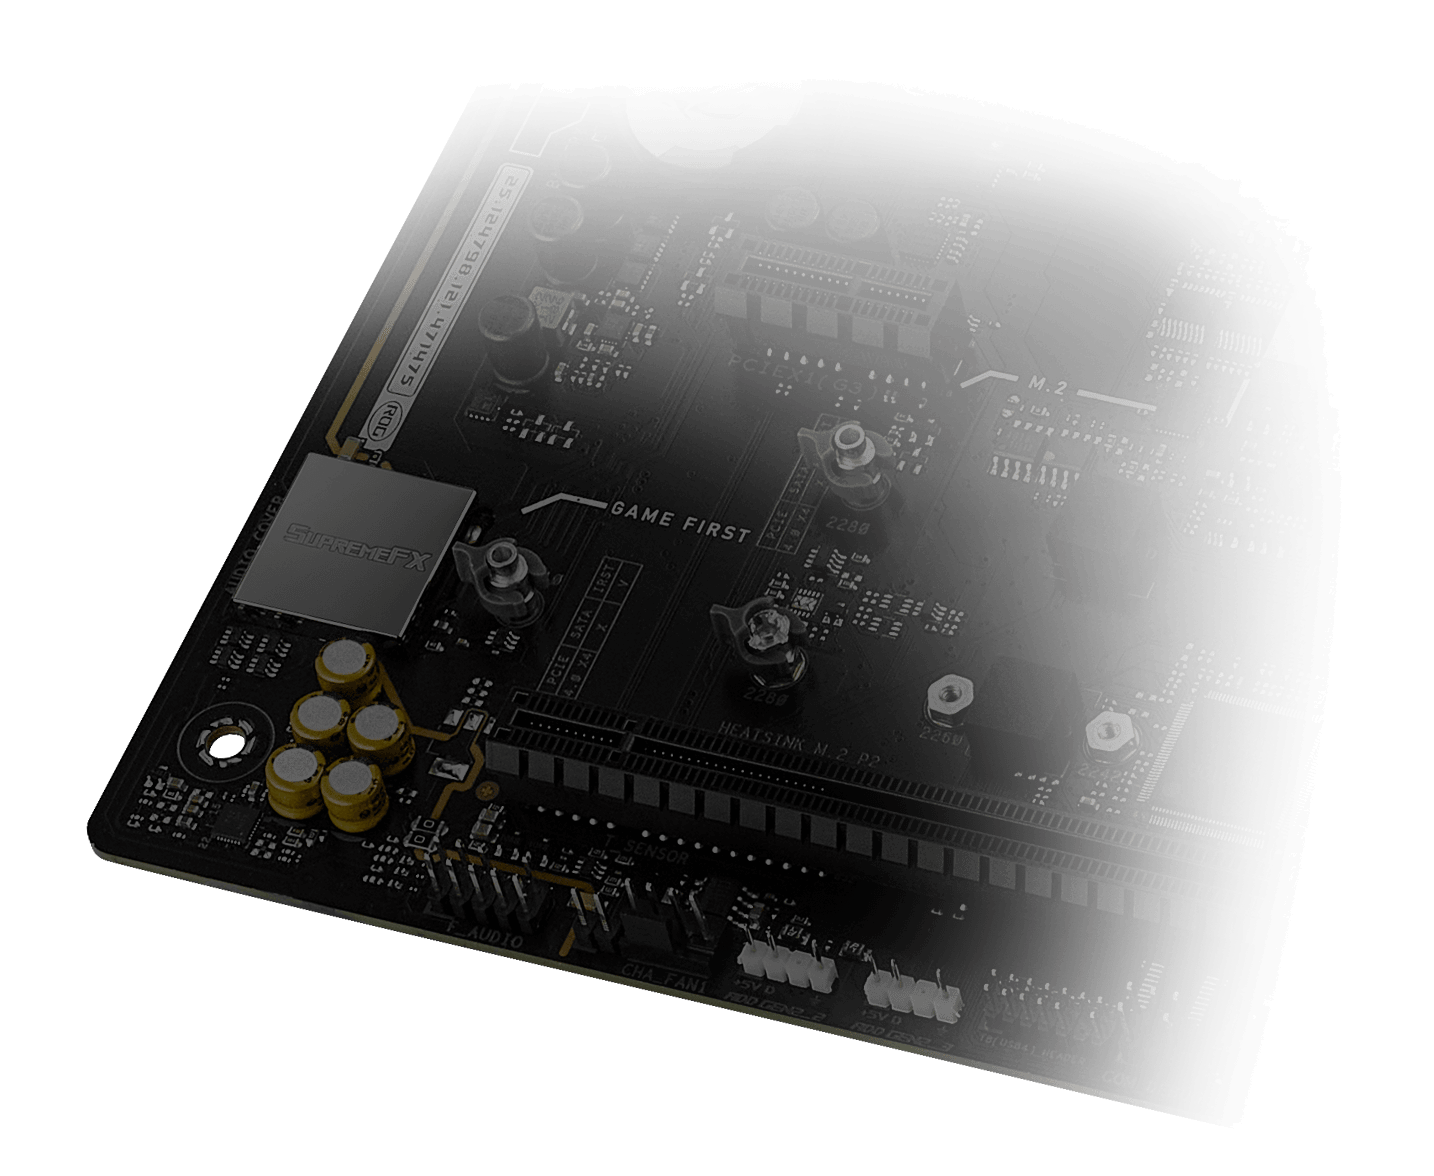 TheStrix Z790-A II motherboard features SupremeFX audio.